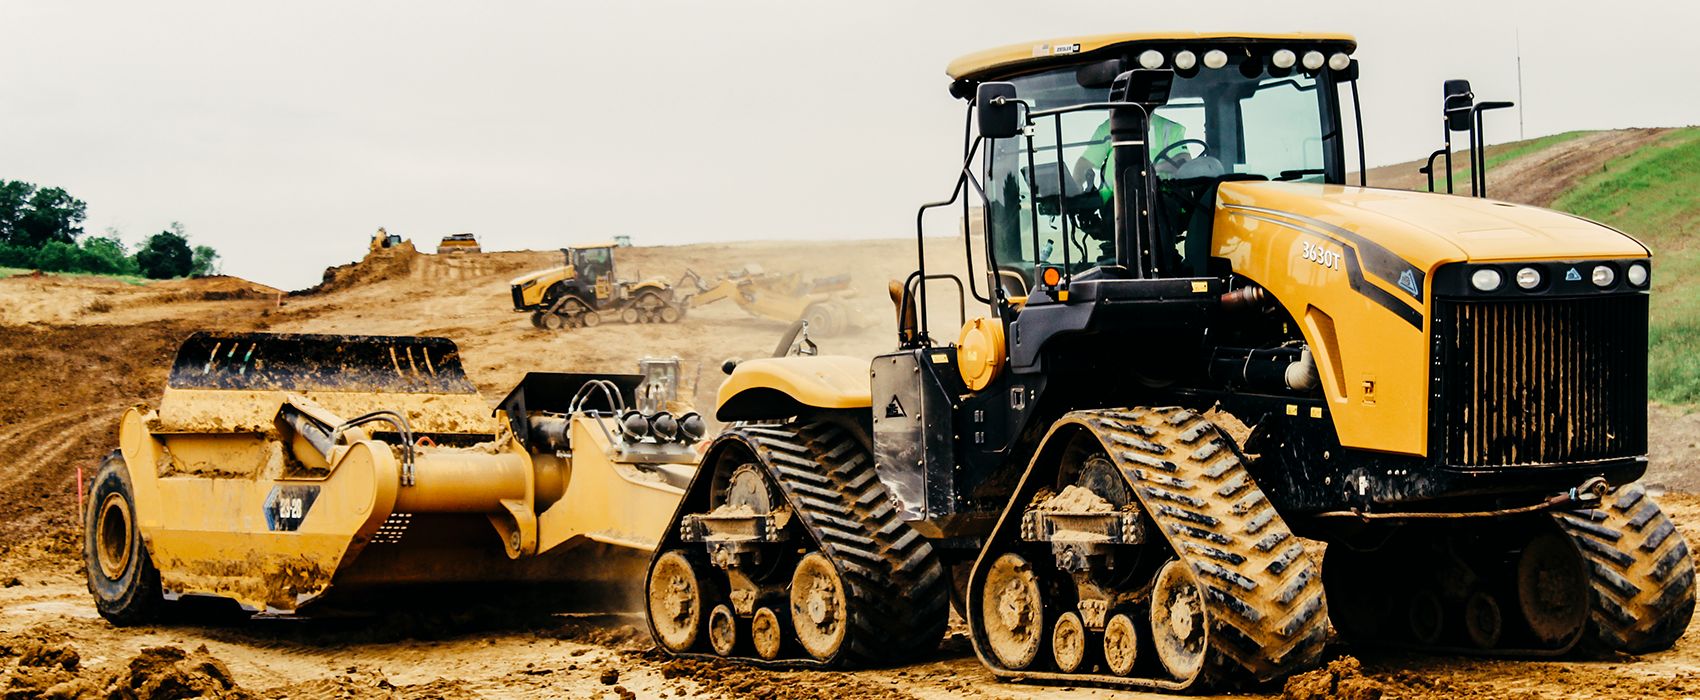 Ready to Buy a Used Tractor? Turn to Cat Used for All Your Tractor Needs